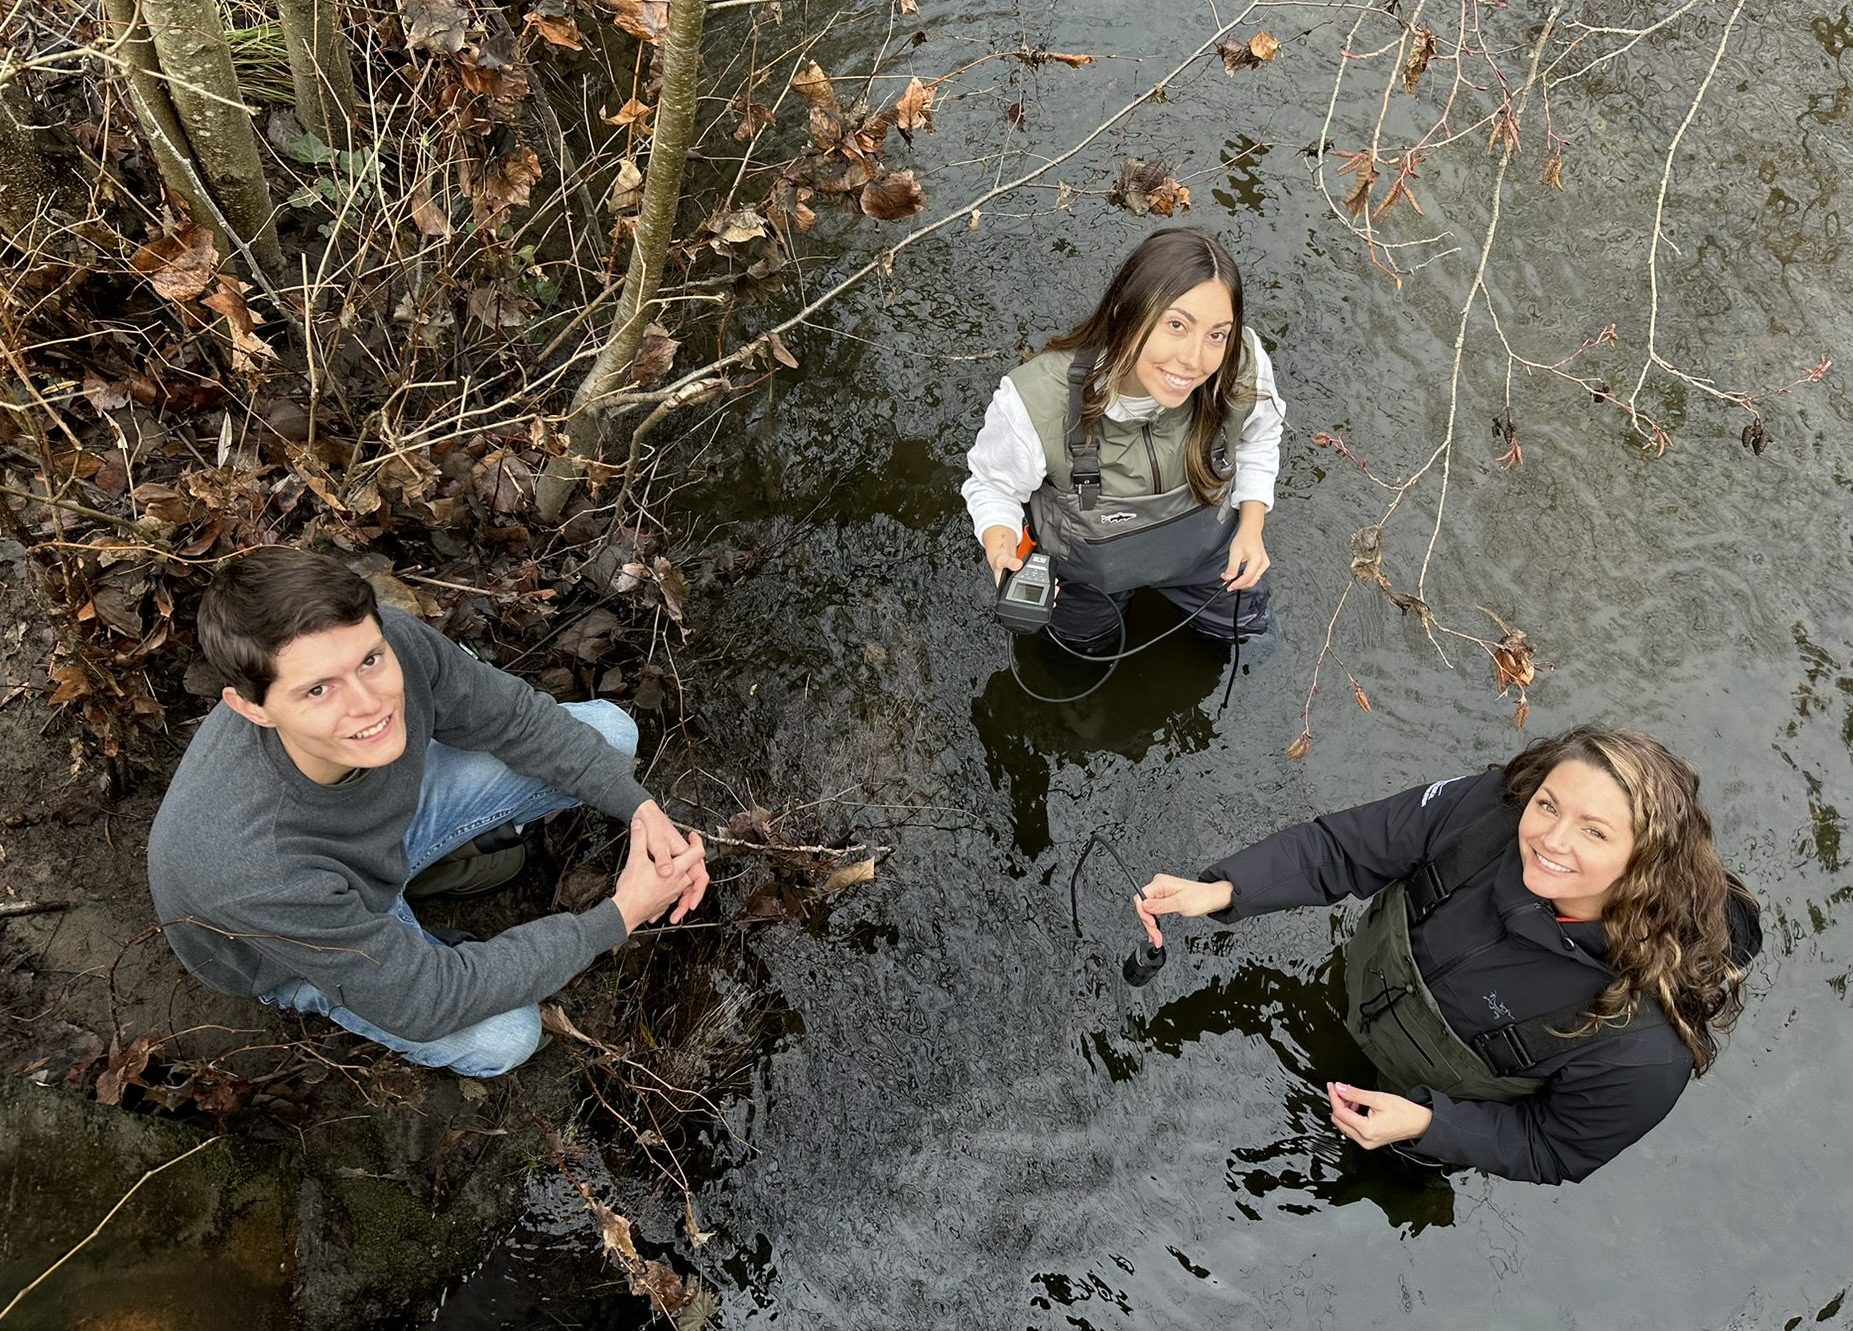 Students standing in water